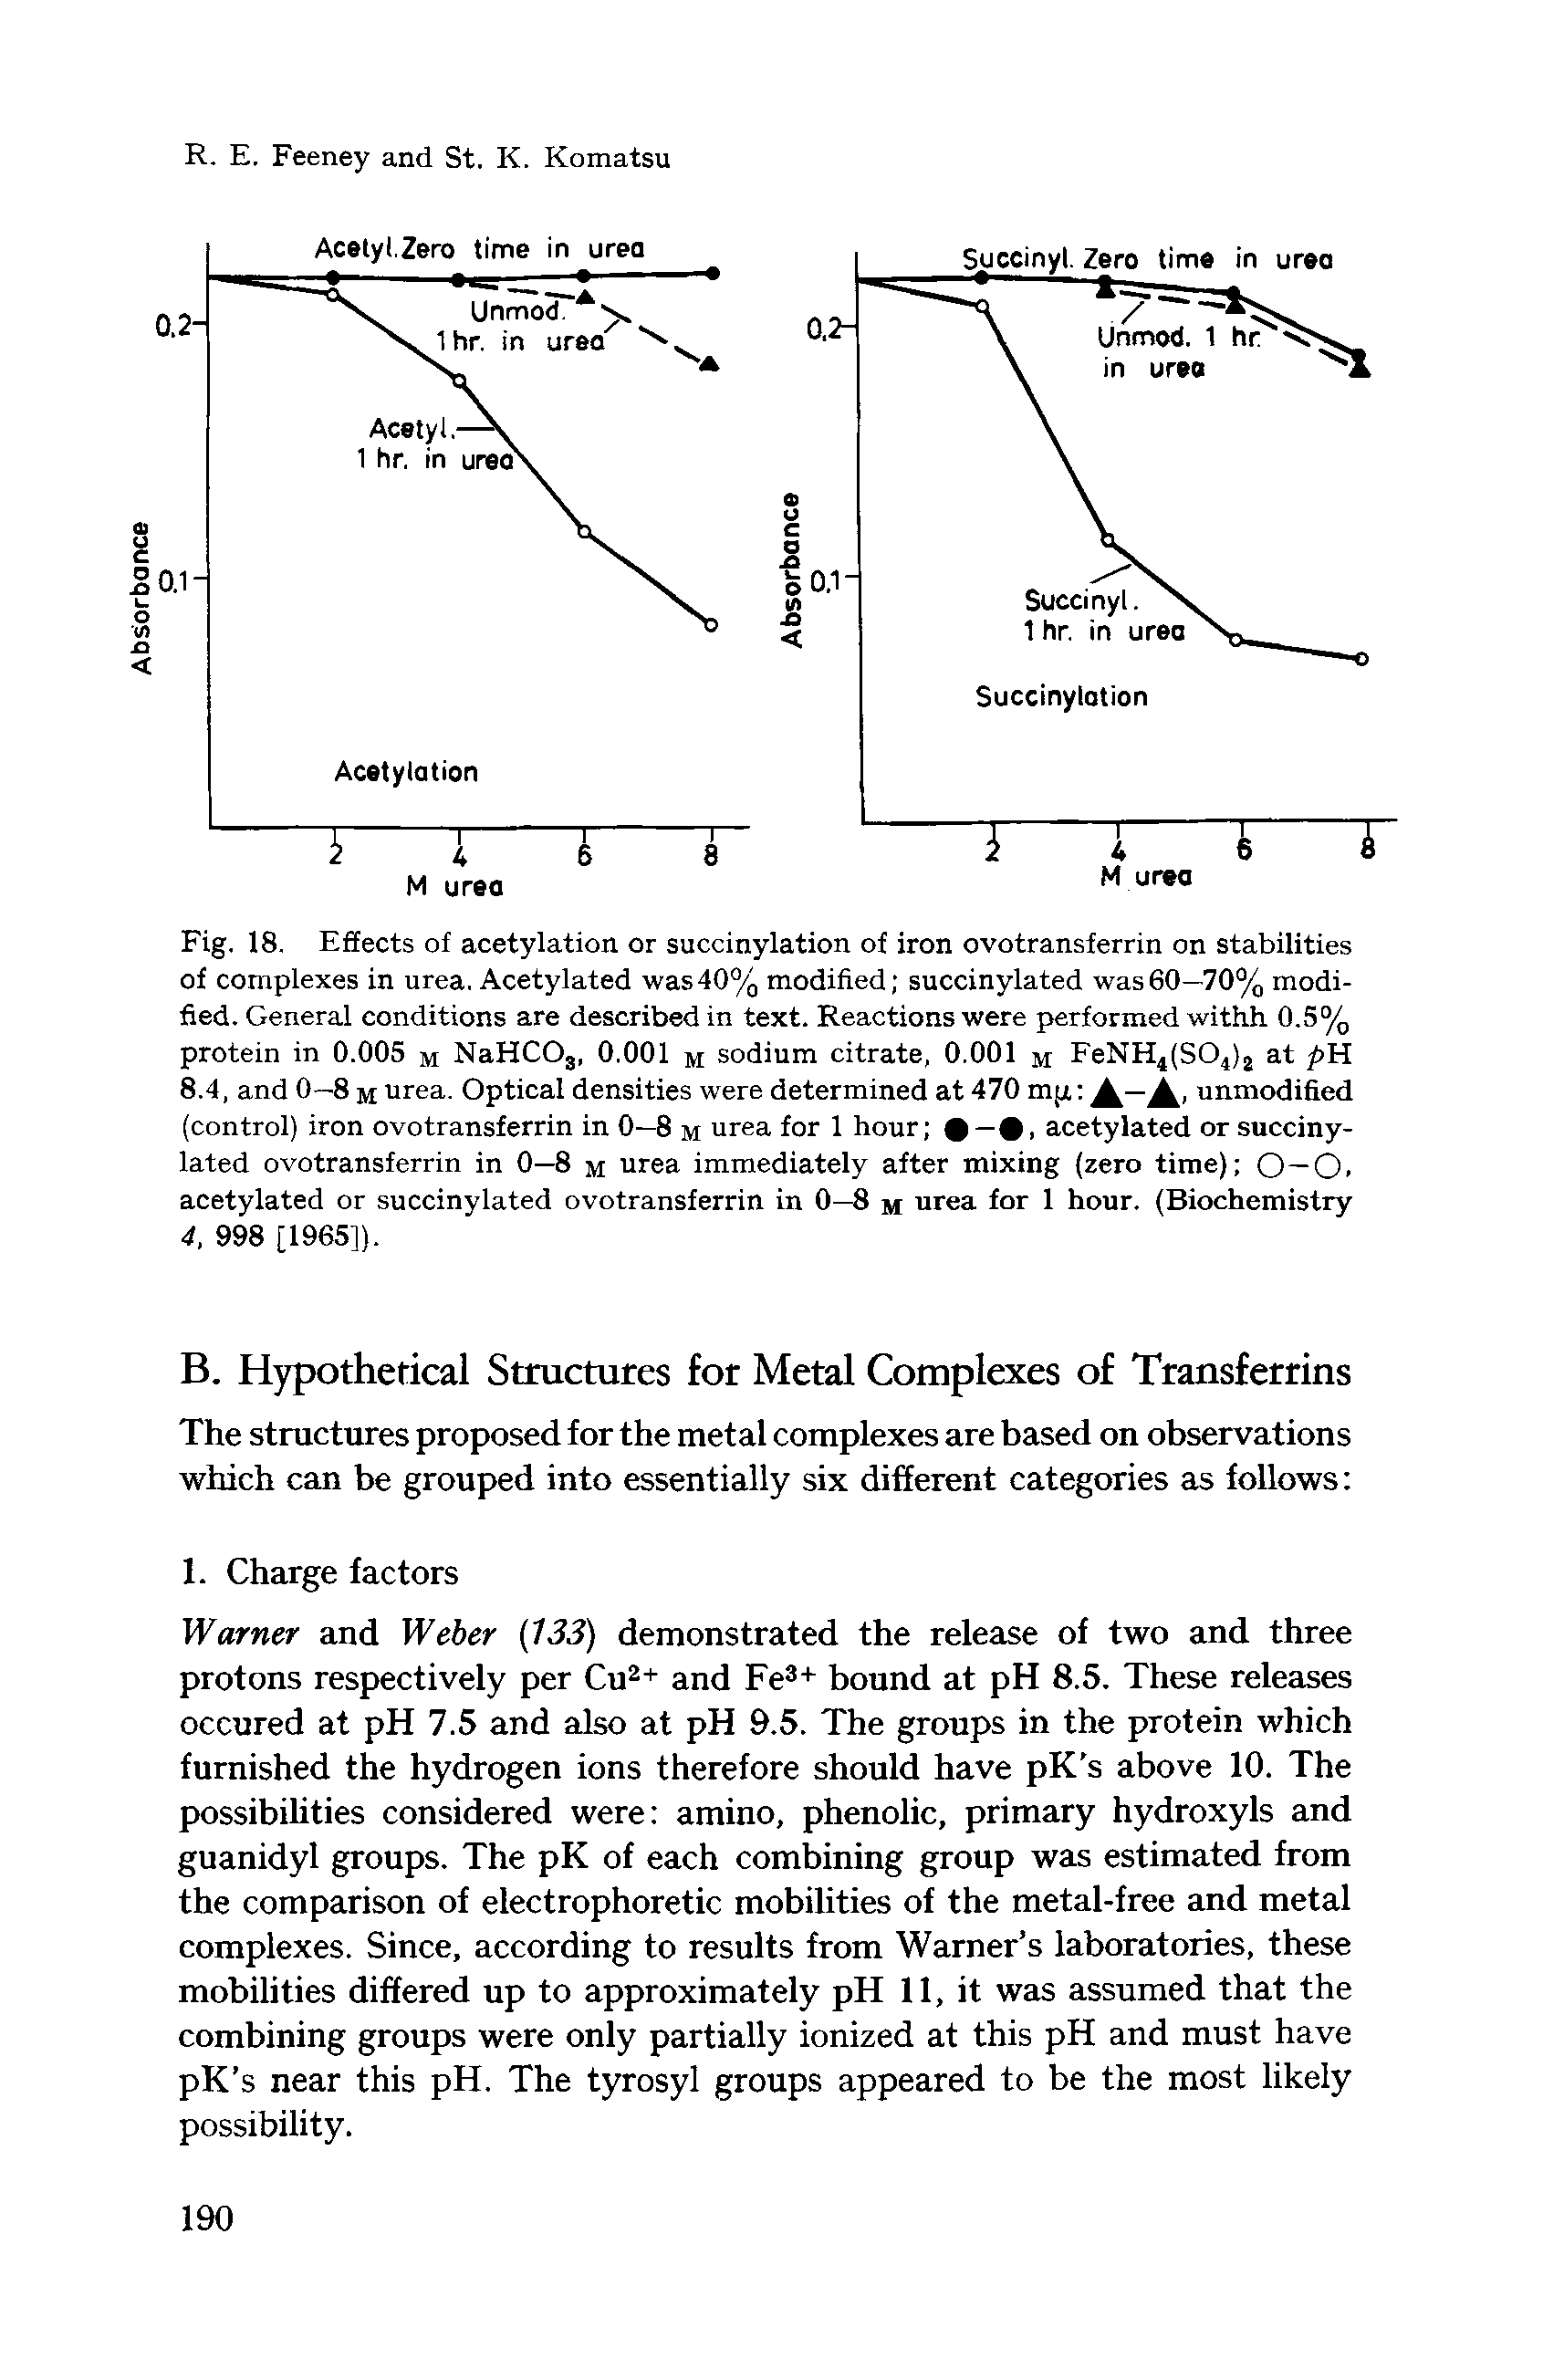 Fig. 18. Effects of acetylation or succinylation of iron ovotransferrin on stabilities of complexes in urea. Acetylated was40% modified succinylated was60—70% modified. General conditions are described in text. Reactions were performed withh 0.5% protein in 0.005 m NaHCOs, 0.001 m sodium citrate, 0.001 m FeNH4(S04)2 at pH 8.4, and 0—8 m urea. Optical densities were determined at 470 mp A — A. unmodified (control) iron ovotransferrin in 0—8 m urea for 1 hour —, acetylated or succinylated ovotransferrin in 0—8 m urea immediately after mixing (zero time) O—O. acetylated or succinylated ovotransferrin in 0—8 m urea for 1 hour. (Biochemistry 4, 998 [1965]).